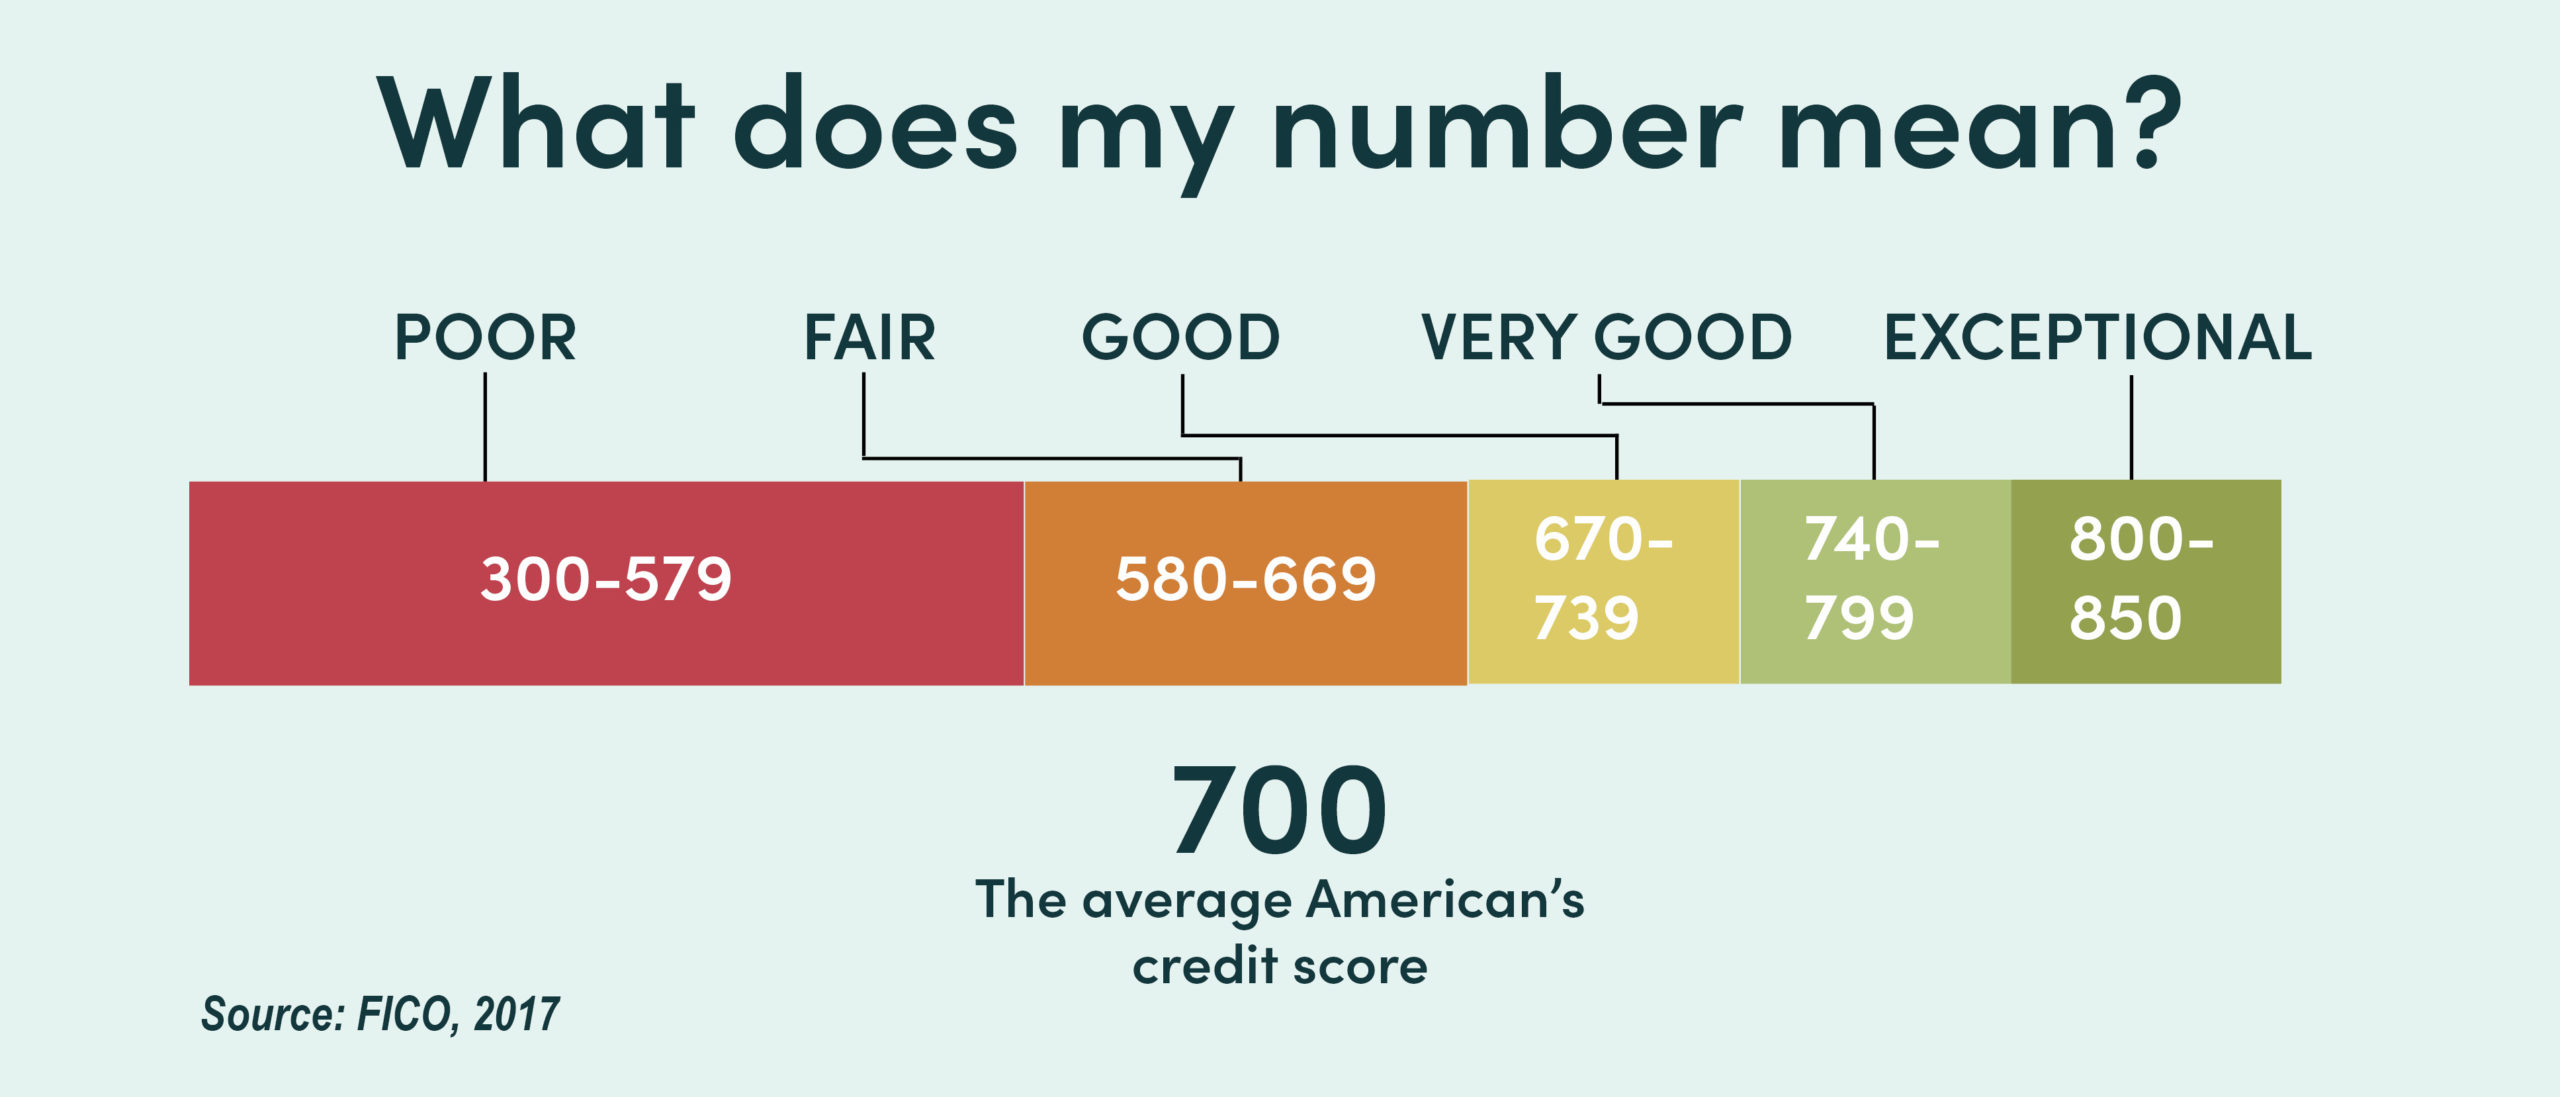 Credit score infographic labeled 'What does my number mean?'. Scores 300-579 labeled Poor, Scores 580-669 labeled Fair, Scores 670-739 labeled Good, Scores 740-799 labeled Very Good, and 800-850 labeled Exceptional. Also states 700 is the average American's credit score.